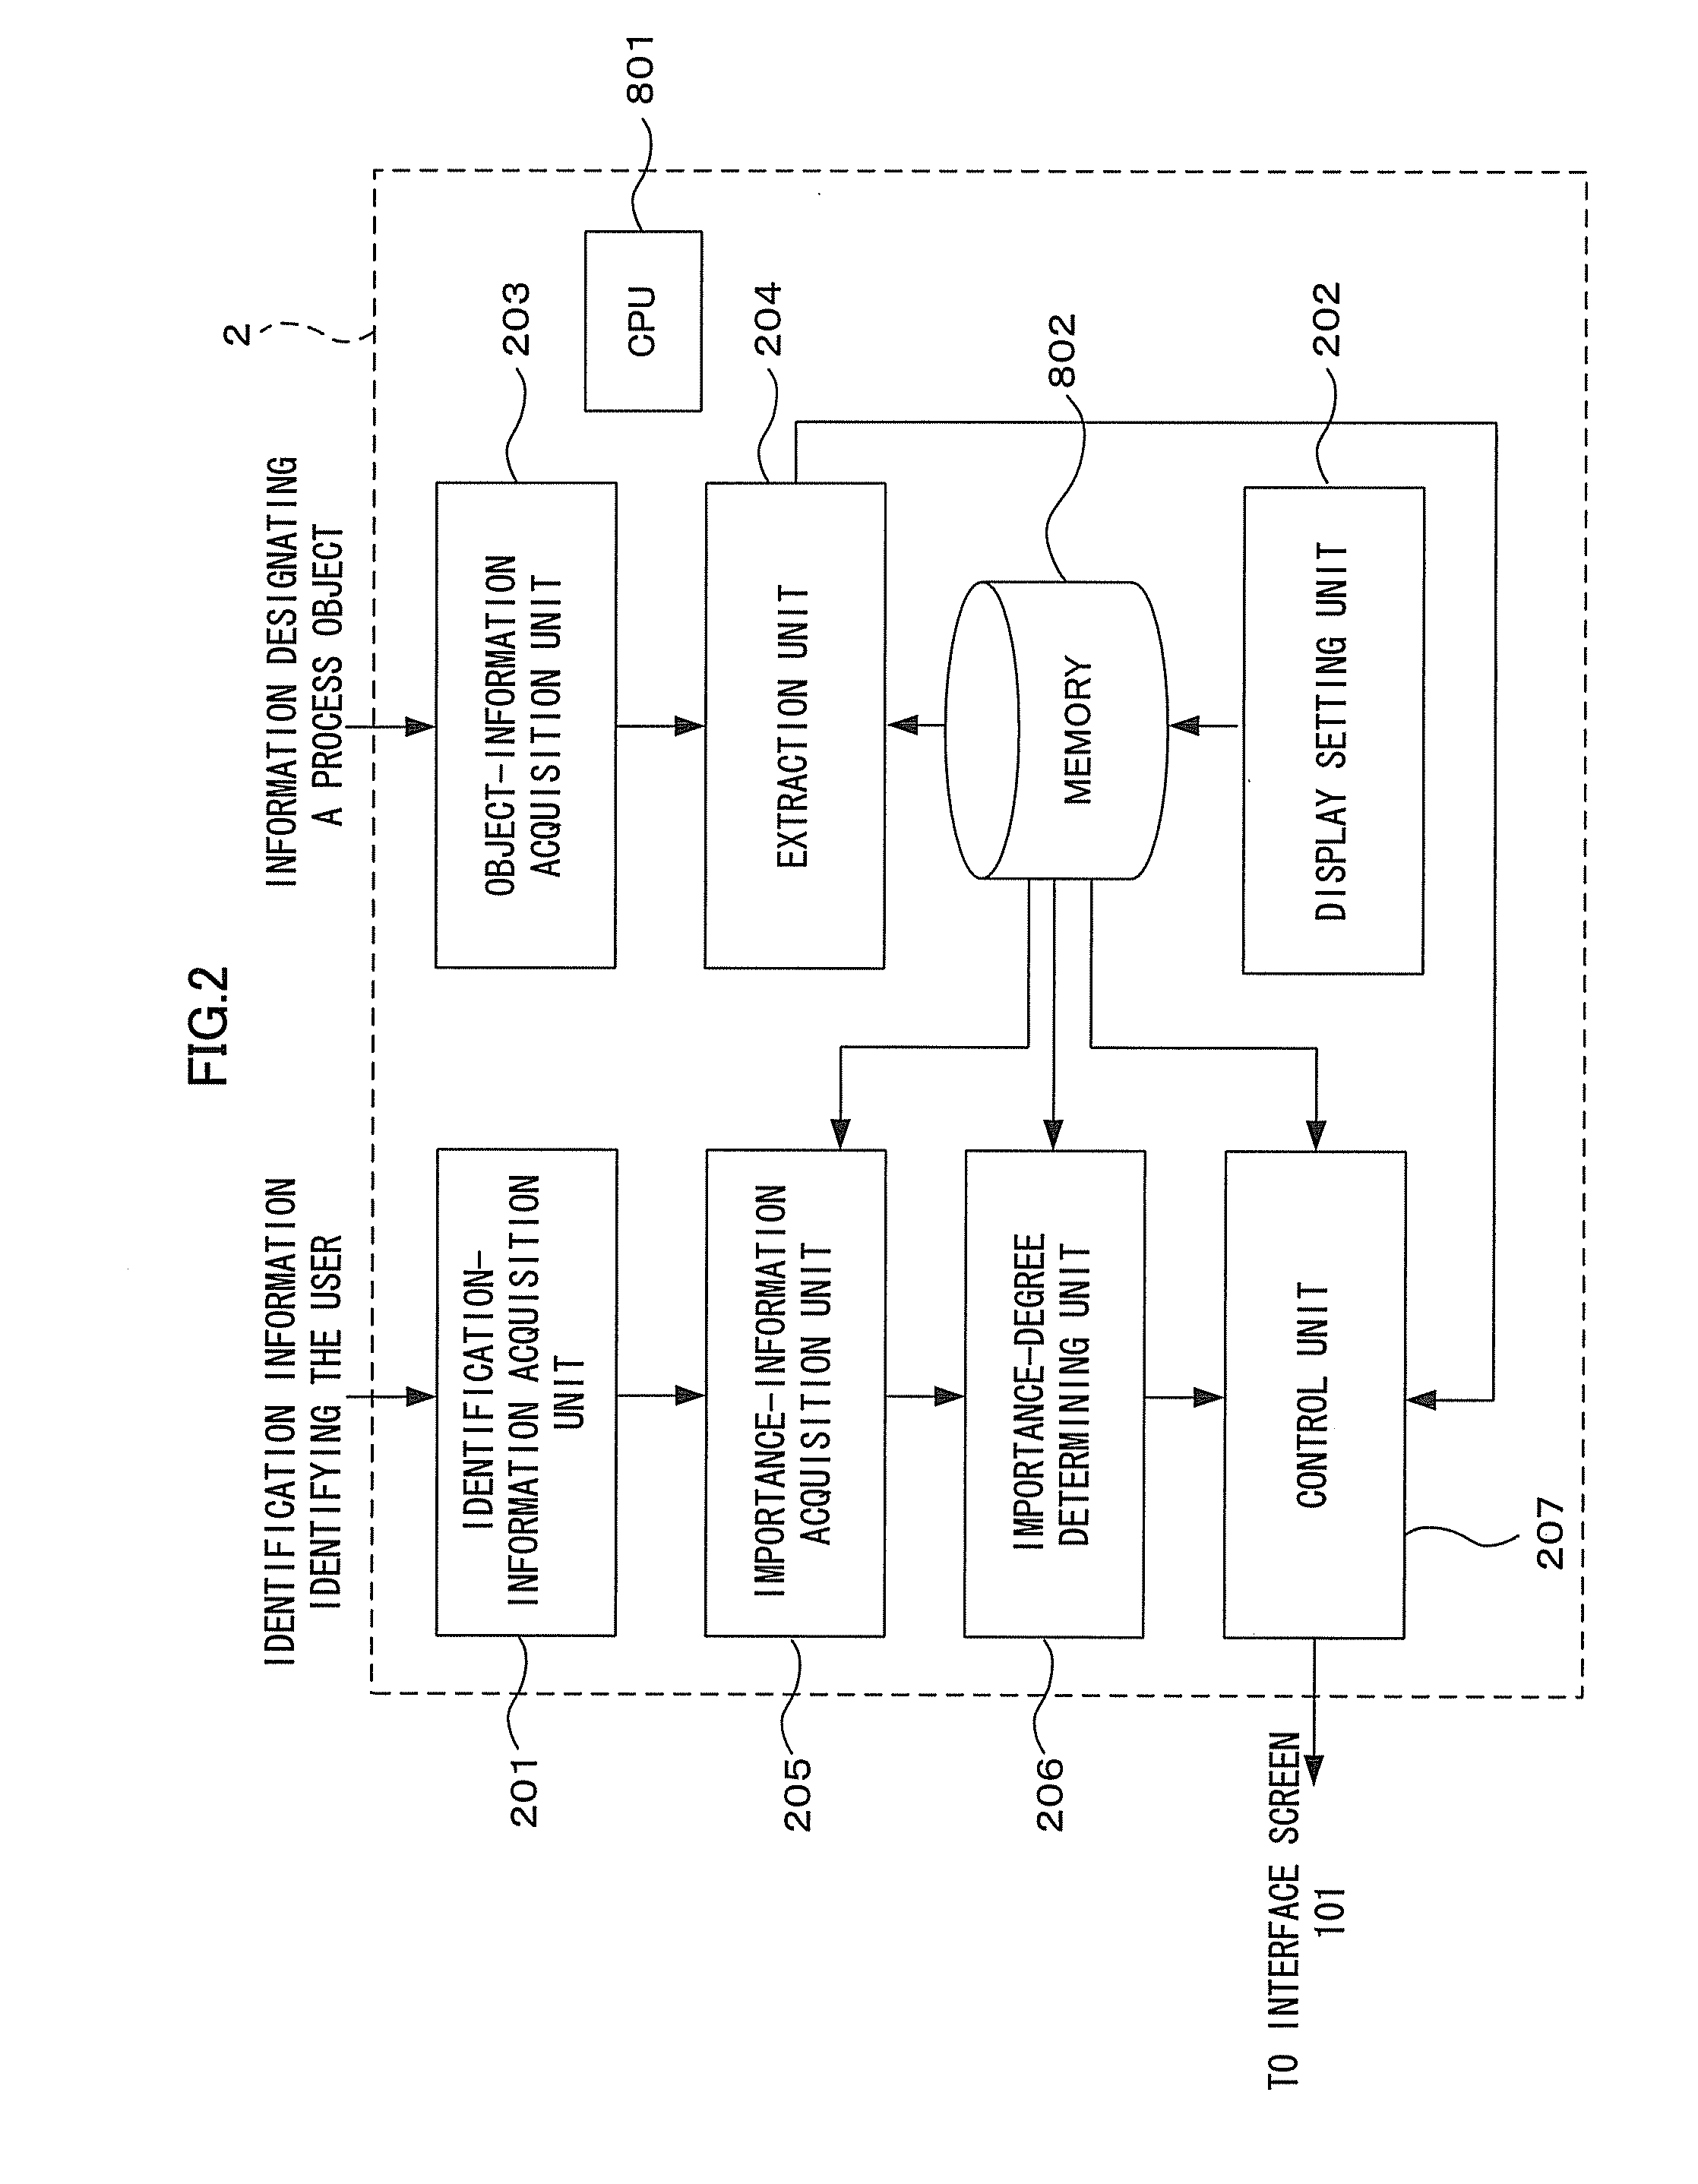 Display control device, image processing apparatus and display control method